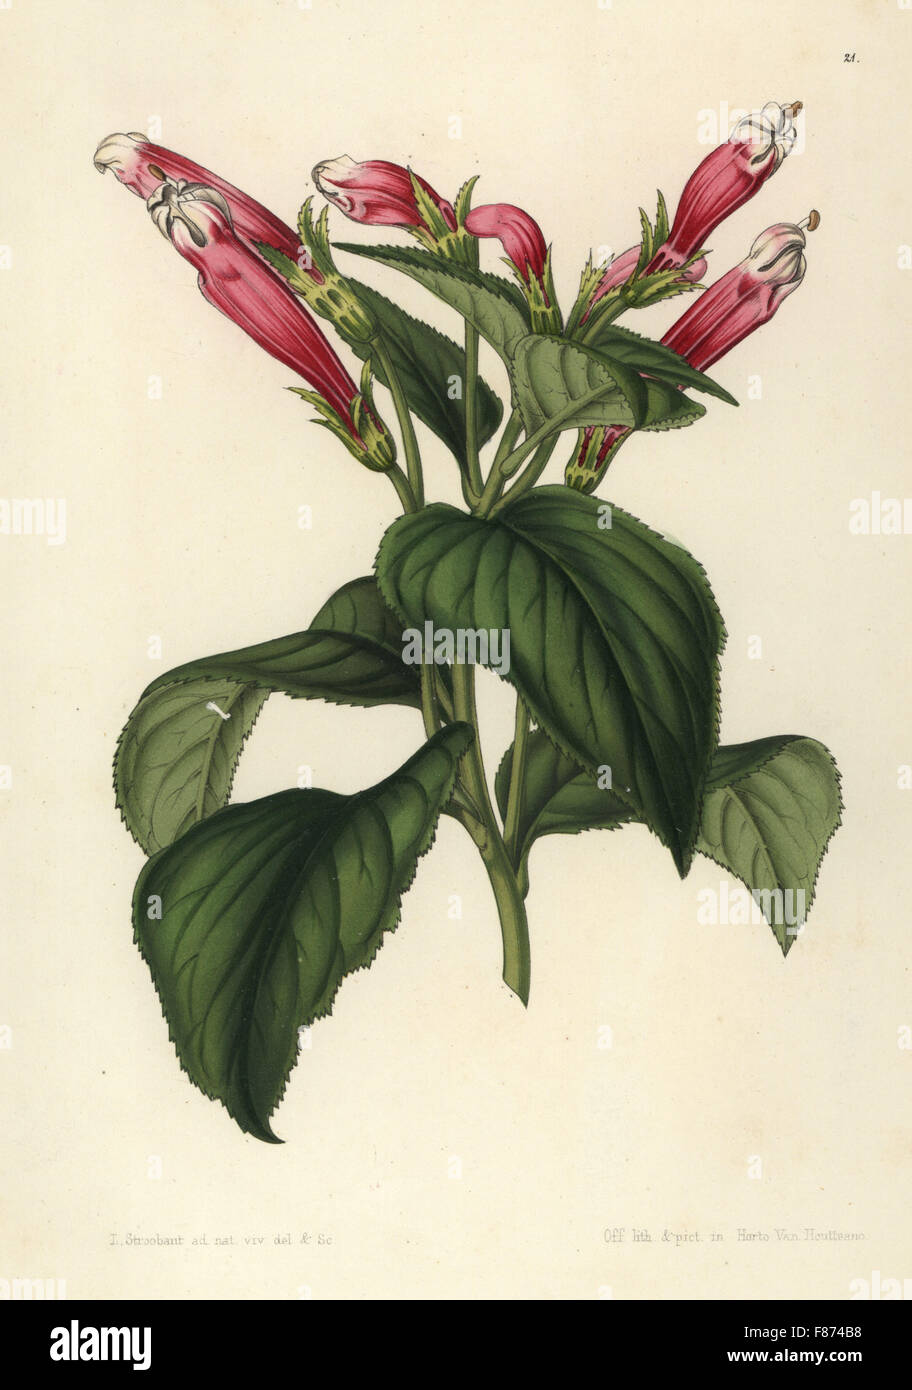 Centropogon coccineus (Siphocampylus coccineus var leucostoma). Handcoloured lithograph by Stroobant from Louis van Houtte and Charles Lemaire's Flowers of the Gardens and Hothouses of Europe, Flore des Serres et des Jardins de l'Europe, Ghent, Belgium, 1851. Stock Photo